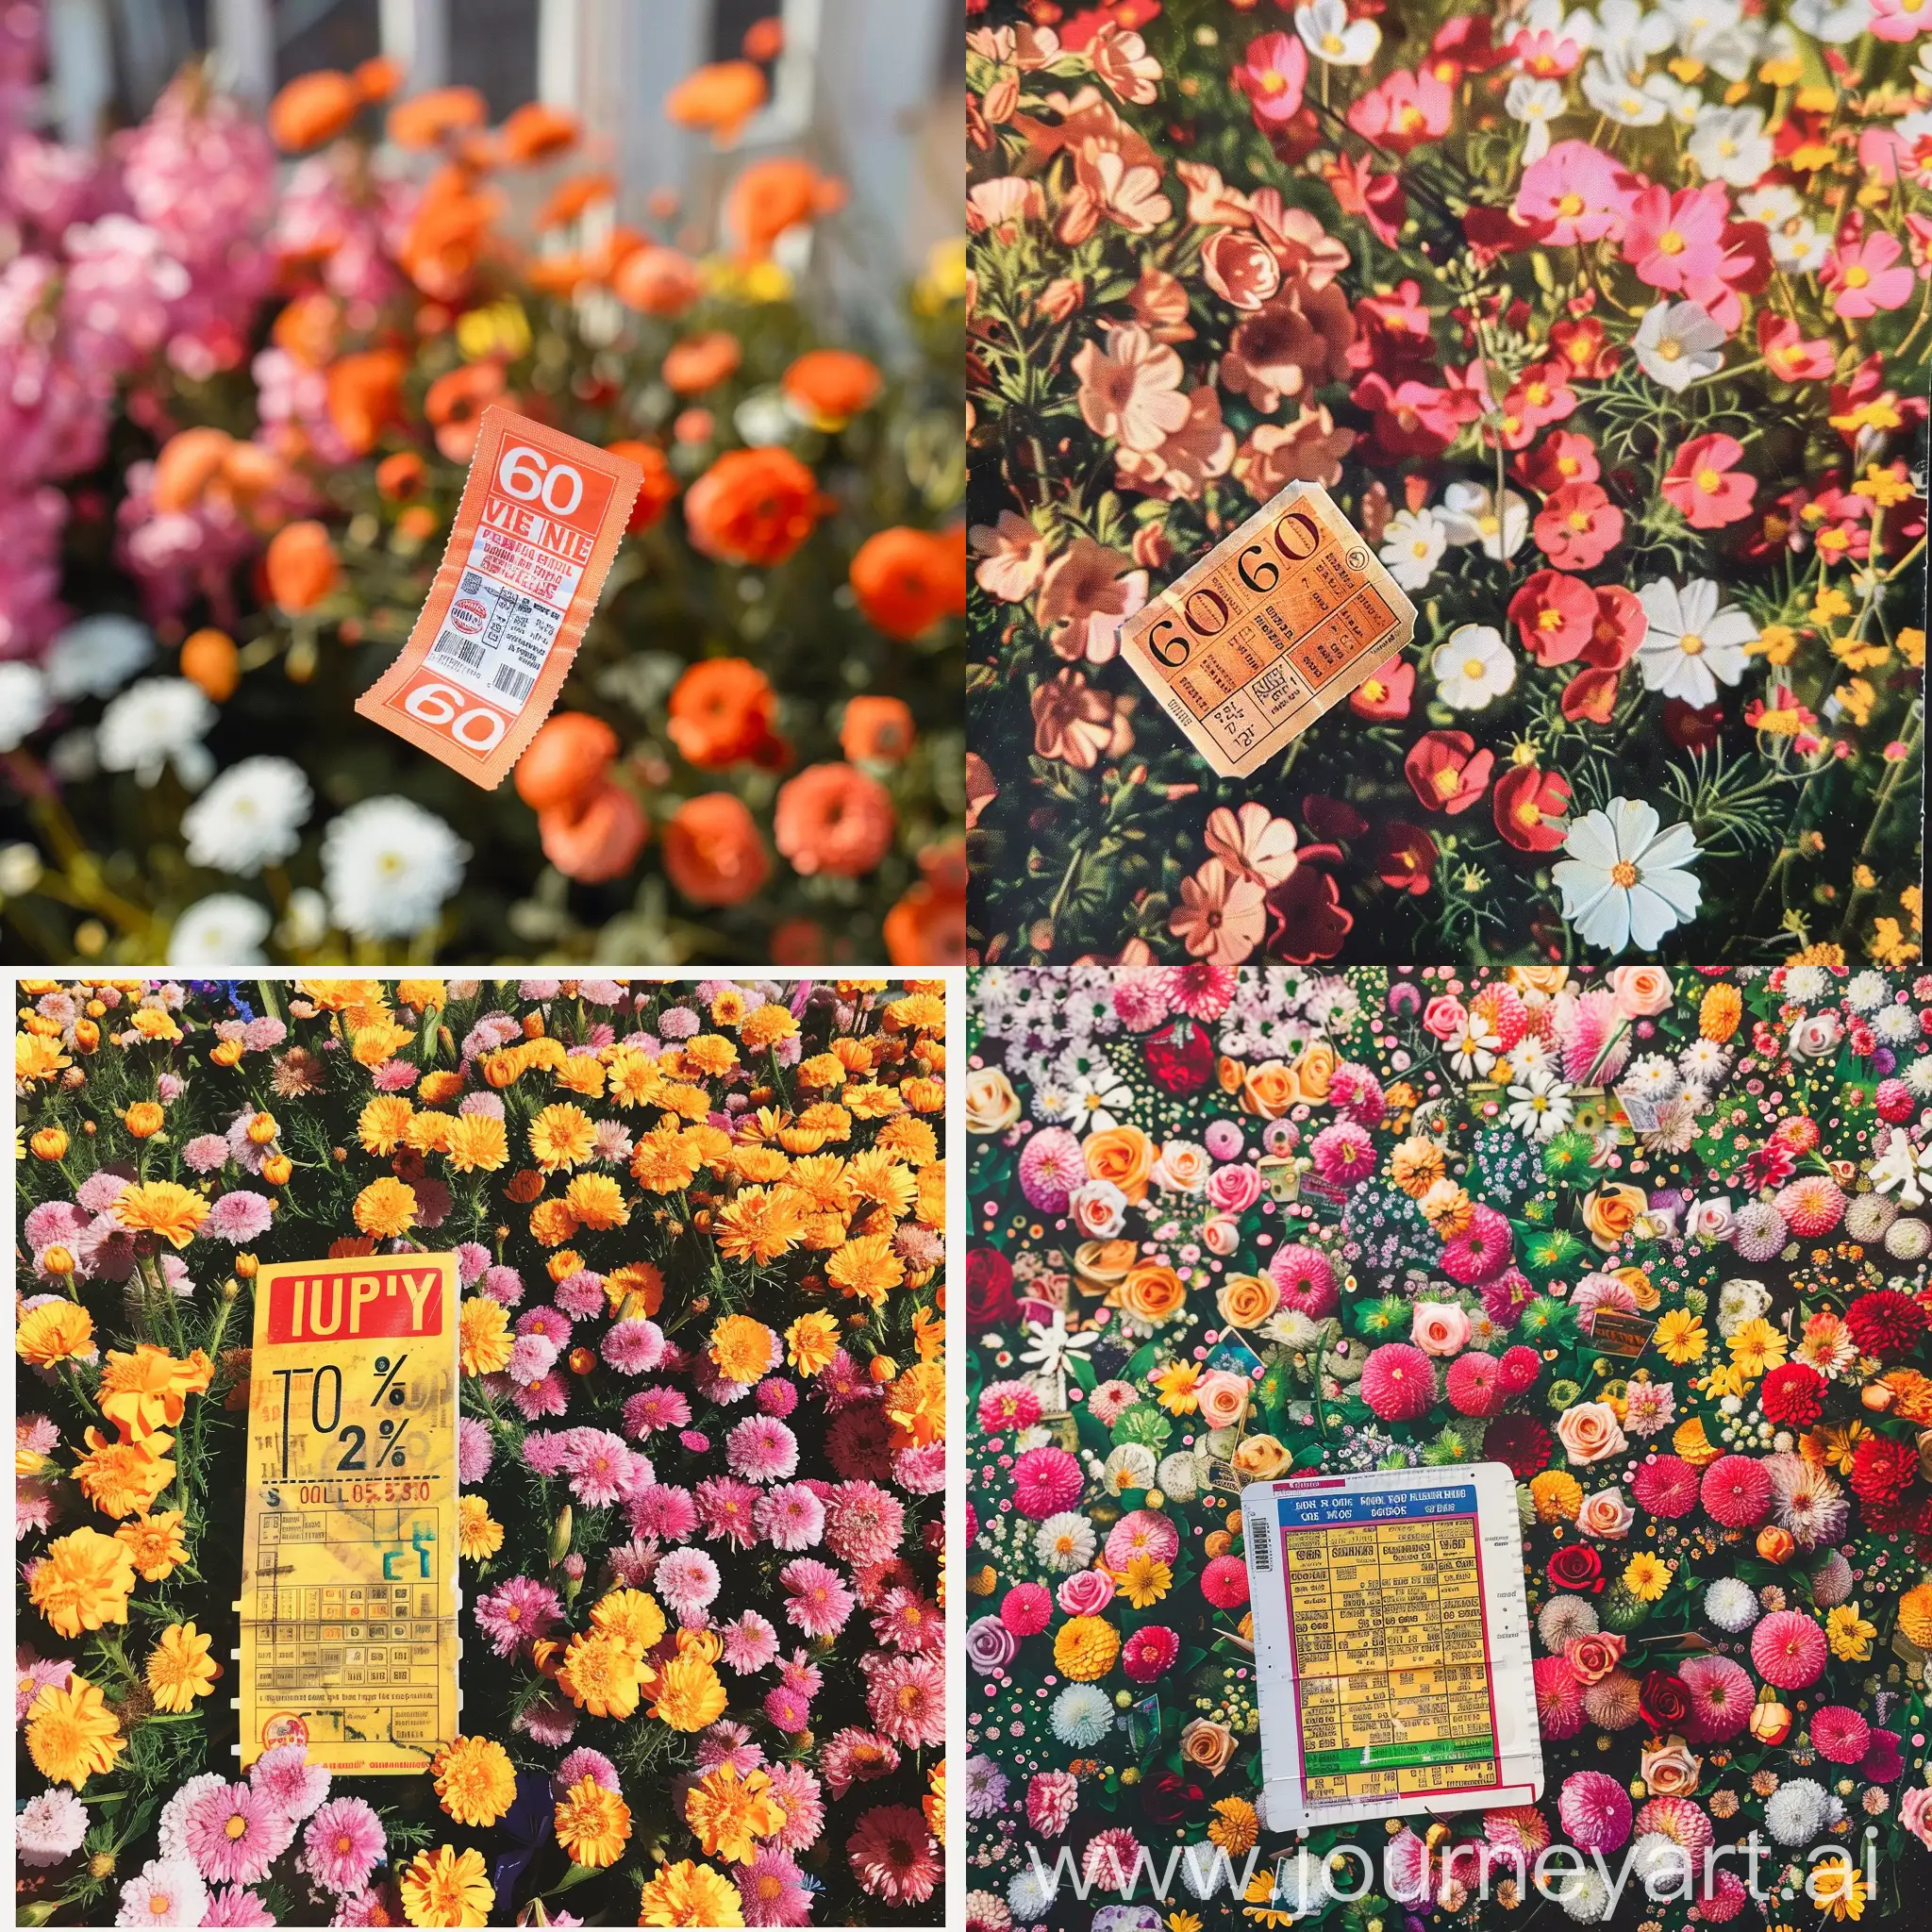 Fortunate-Lottery-Ticket-Surrounded-by-Street-Flowers